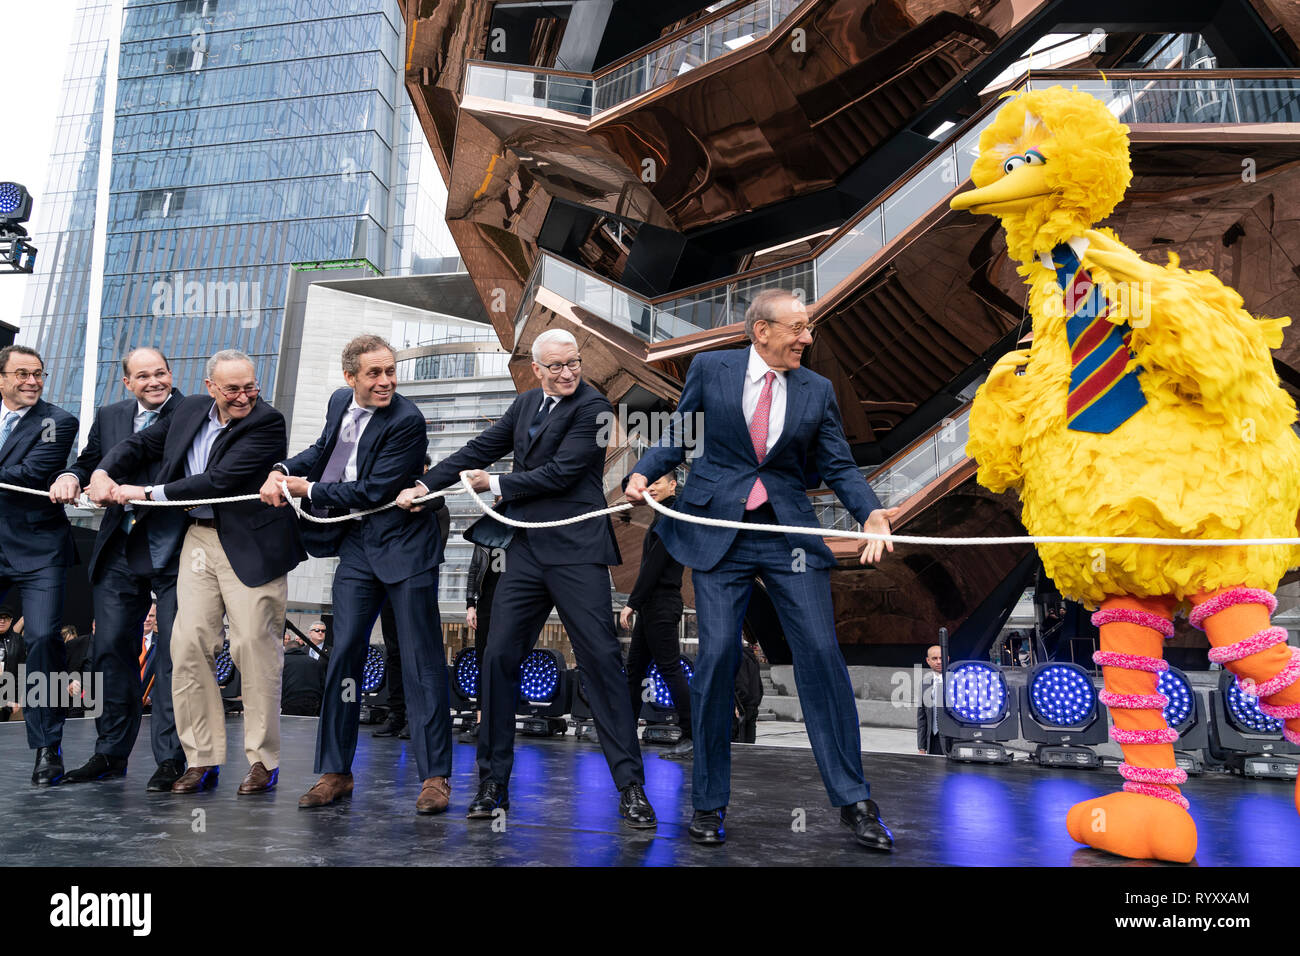 New York, NY - March 15, 2019: Hudson Yards is lagest private development in New York. Opening ceremony at Hudson Yards of Manhattan Credit: lev radin/Alamy Live News Stock Photo